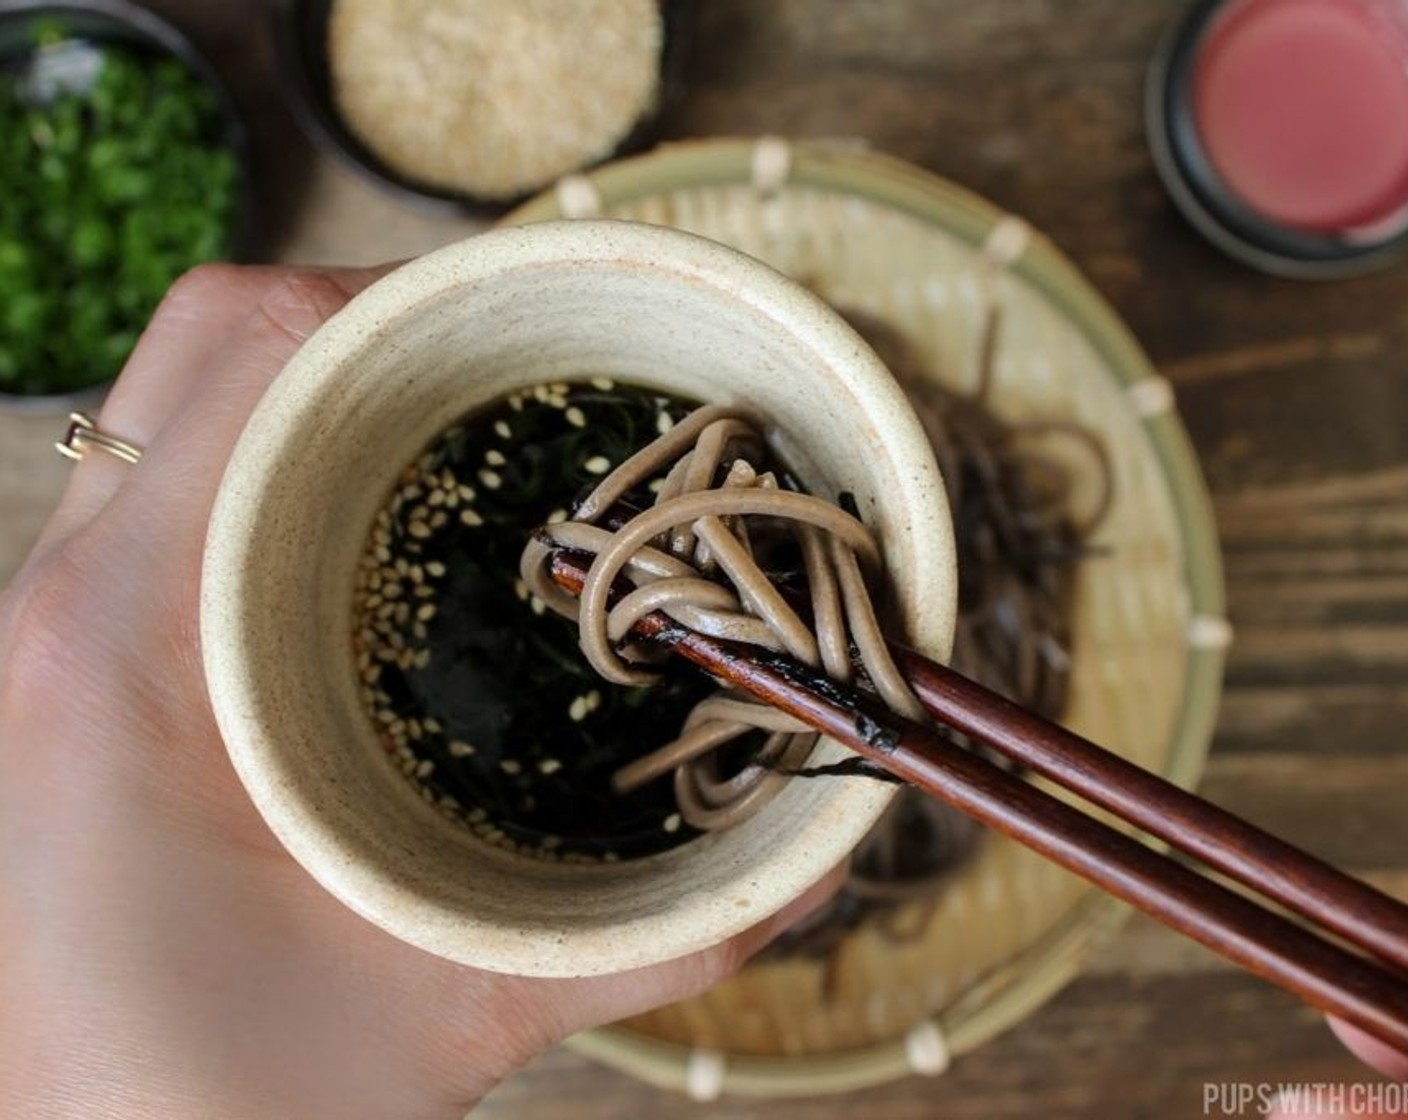 step 10 Pour the dipping sauce into small cups or bowls, and if desired add Toasted White Sesame Seeds (1 Tbsp) and serve the soba noodles with Daikon Radishes (1 1/2 Tbsp), Wasabi Paste (1 tsp), and Fresh Ginger (1/2 Tbsp).